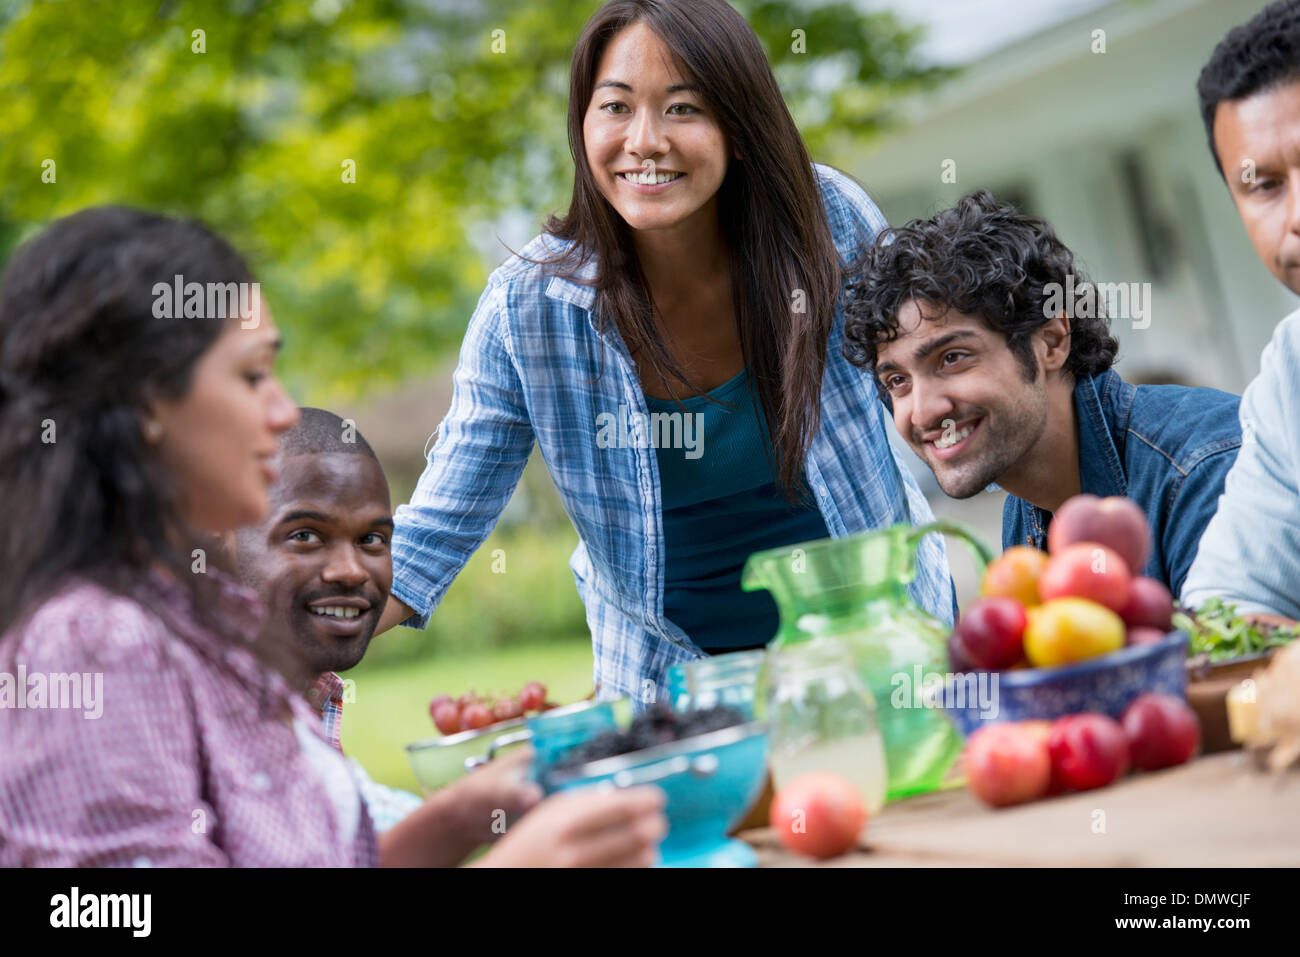 A summer party outdoors. Four people at a table. Stock Photo